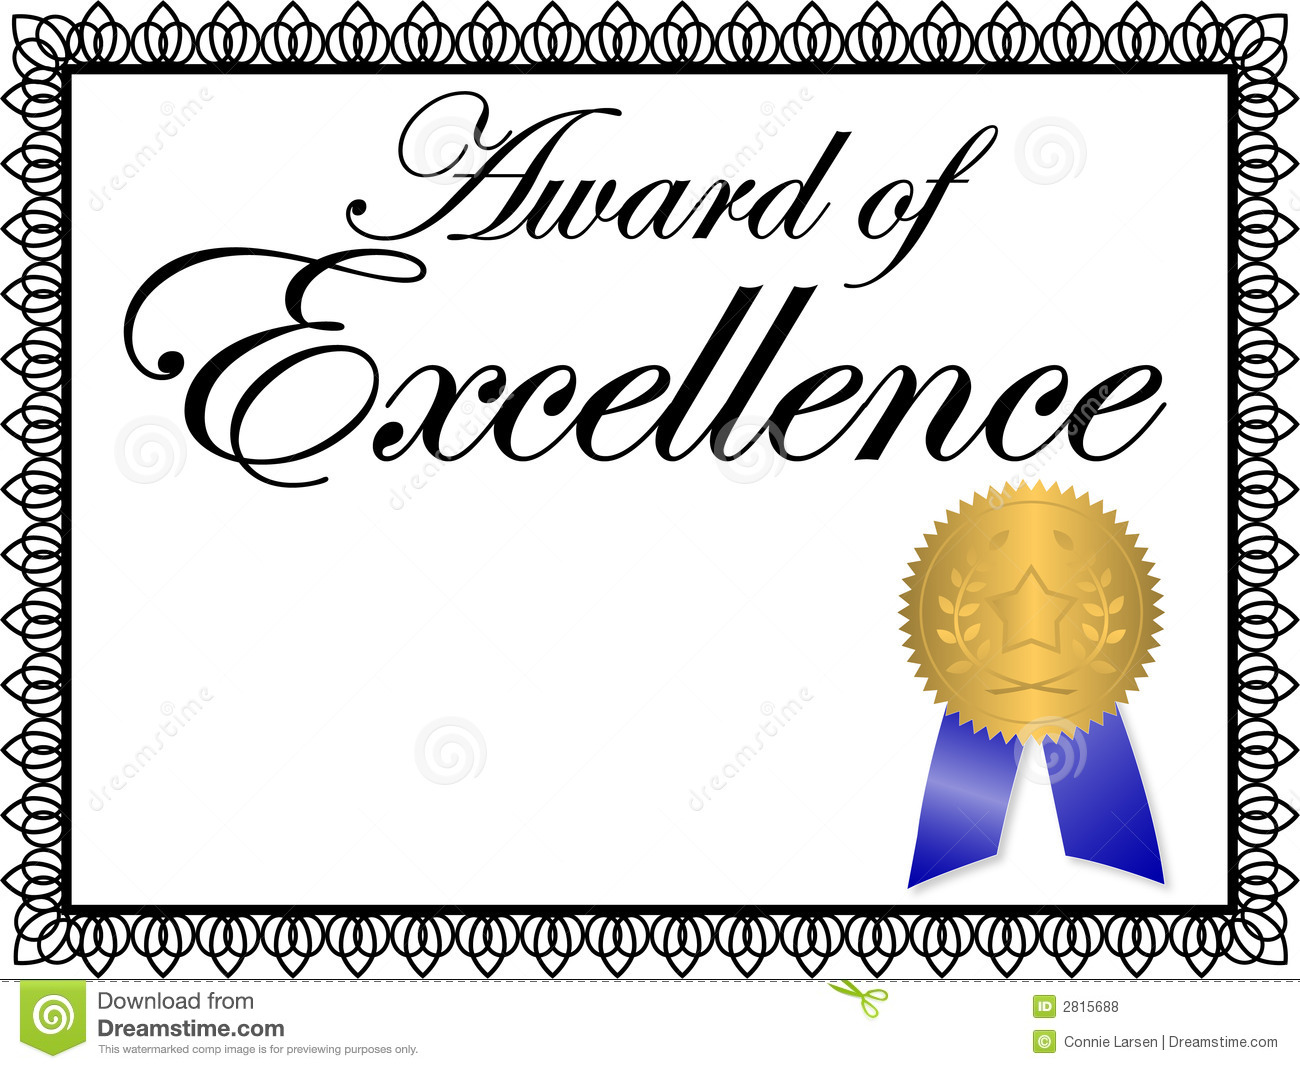 Illustration Of A Certificate   Award Of Excellence   Personalize With